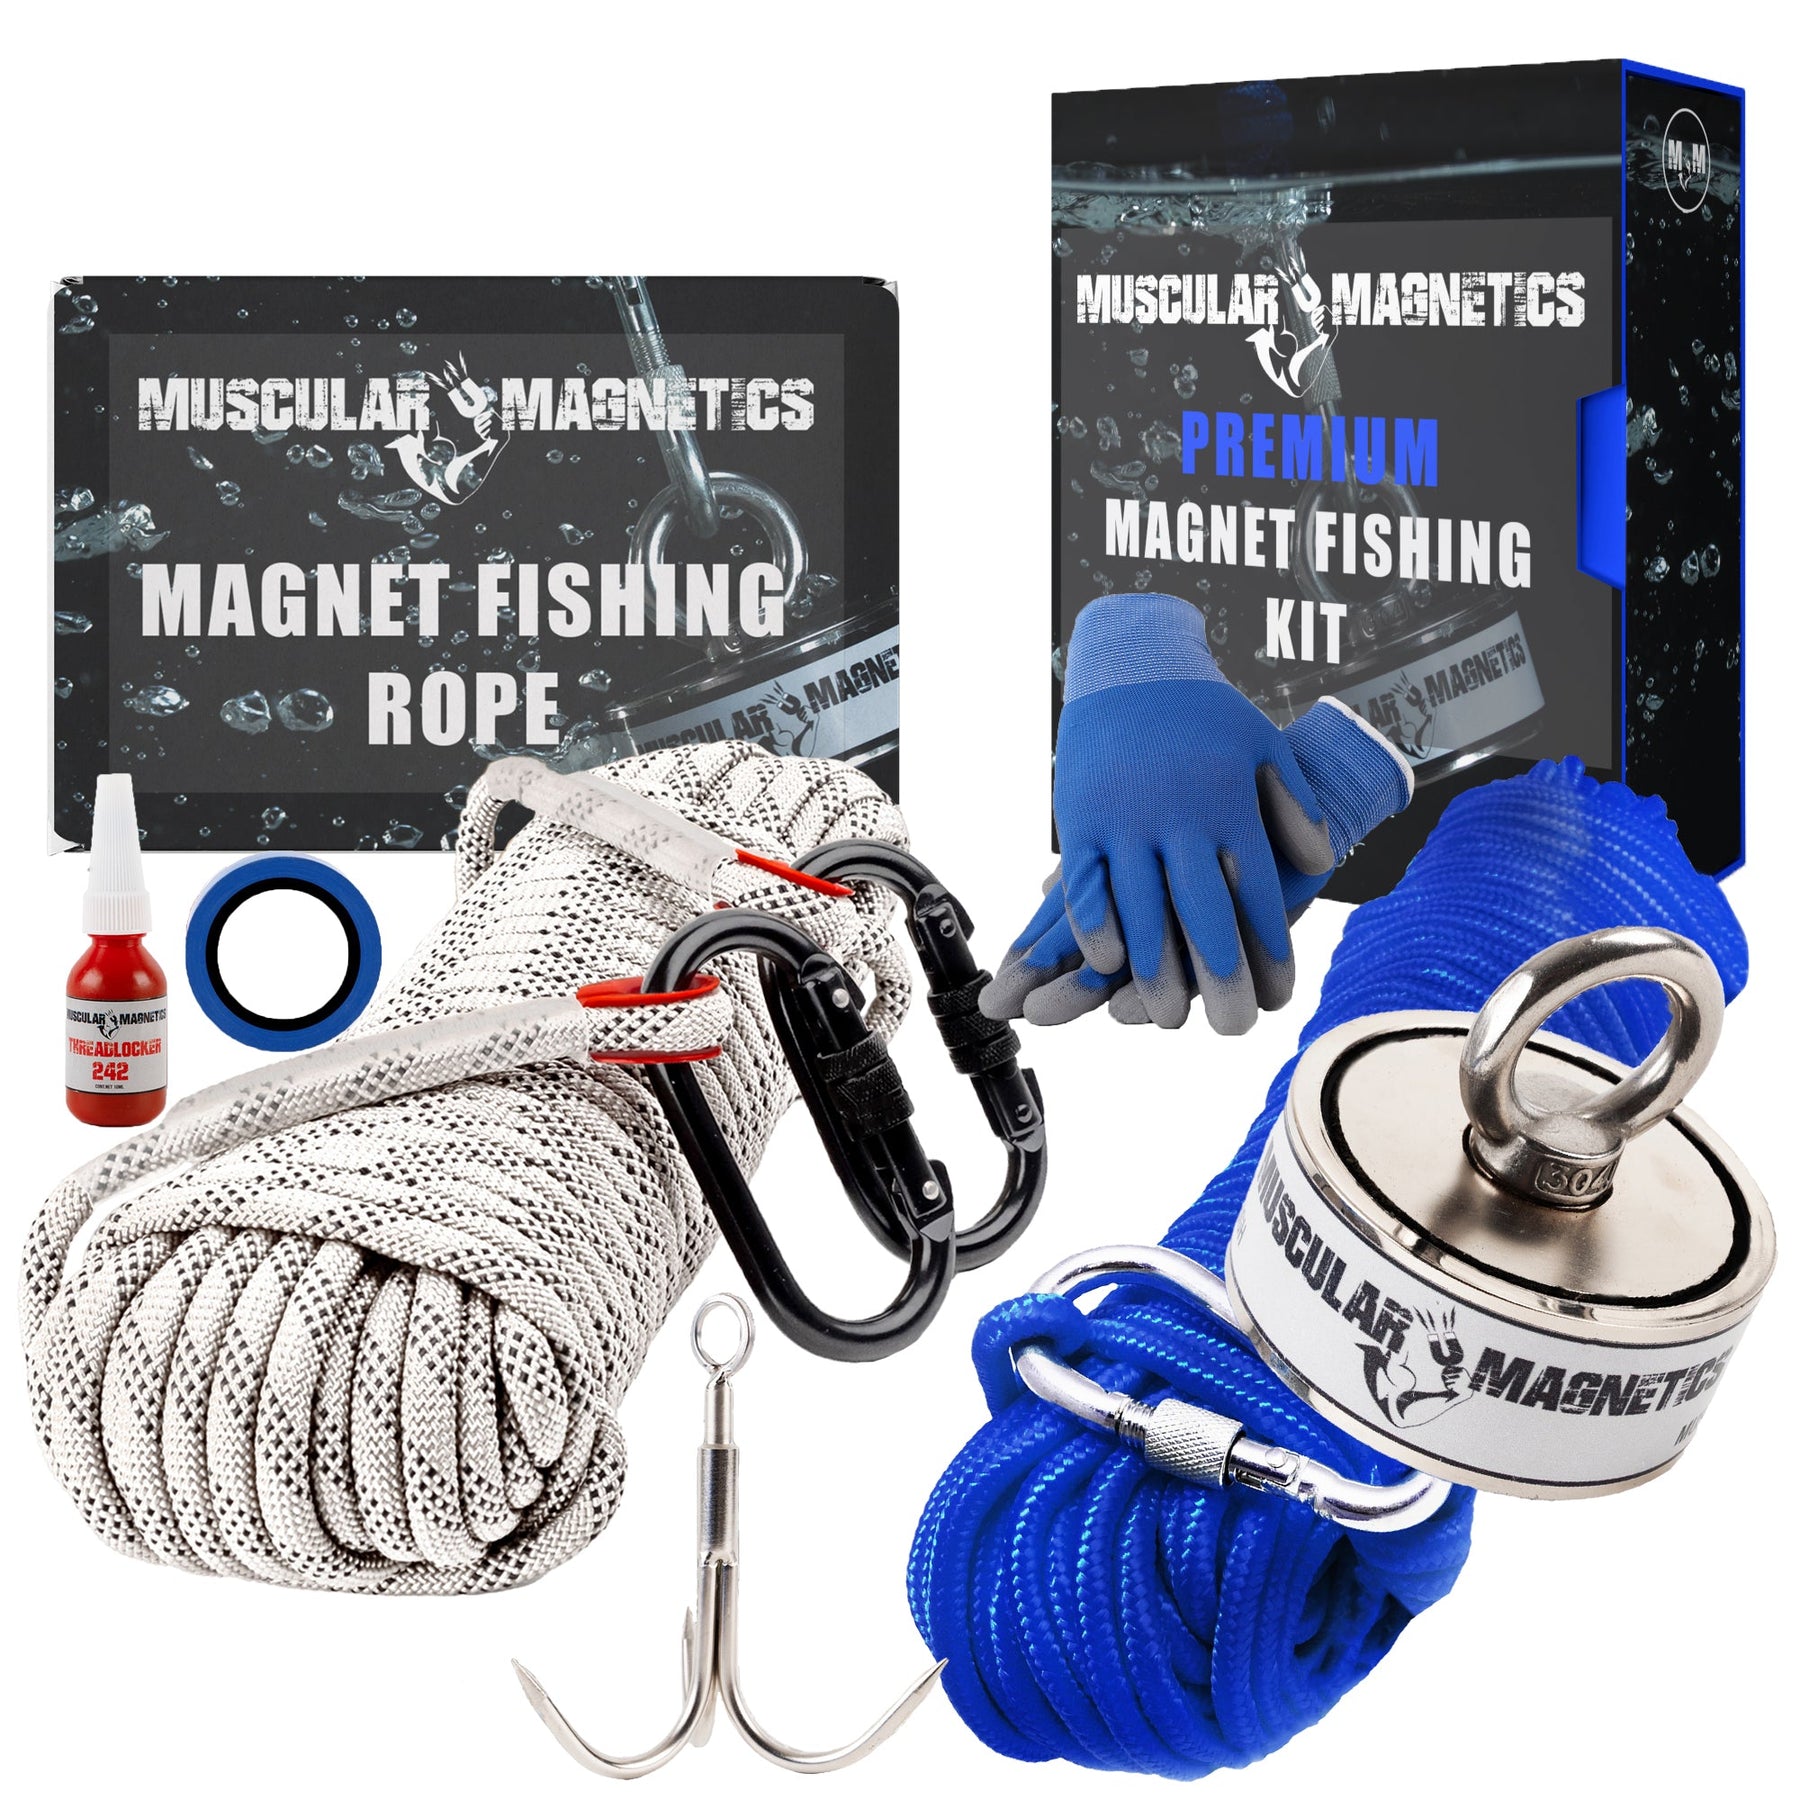 Double Sided Magnet Fishing Kit - Strong Magnet for Magnet Fishing